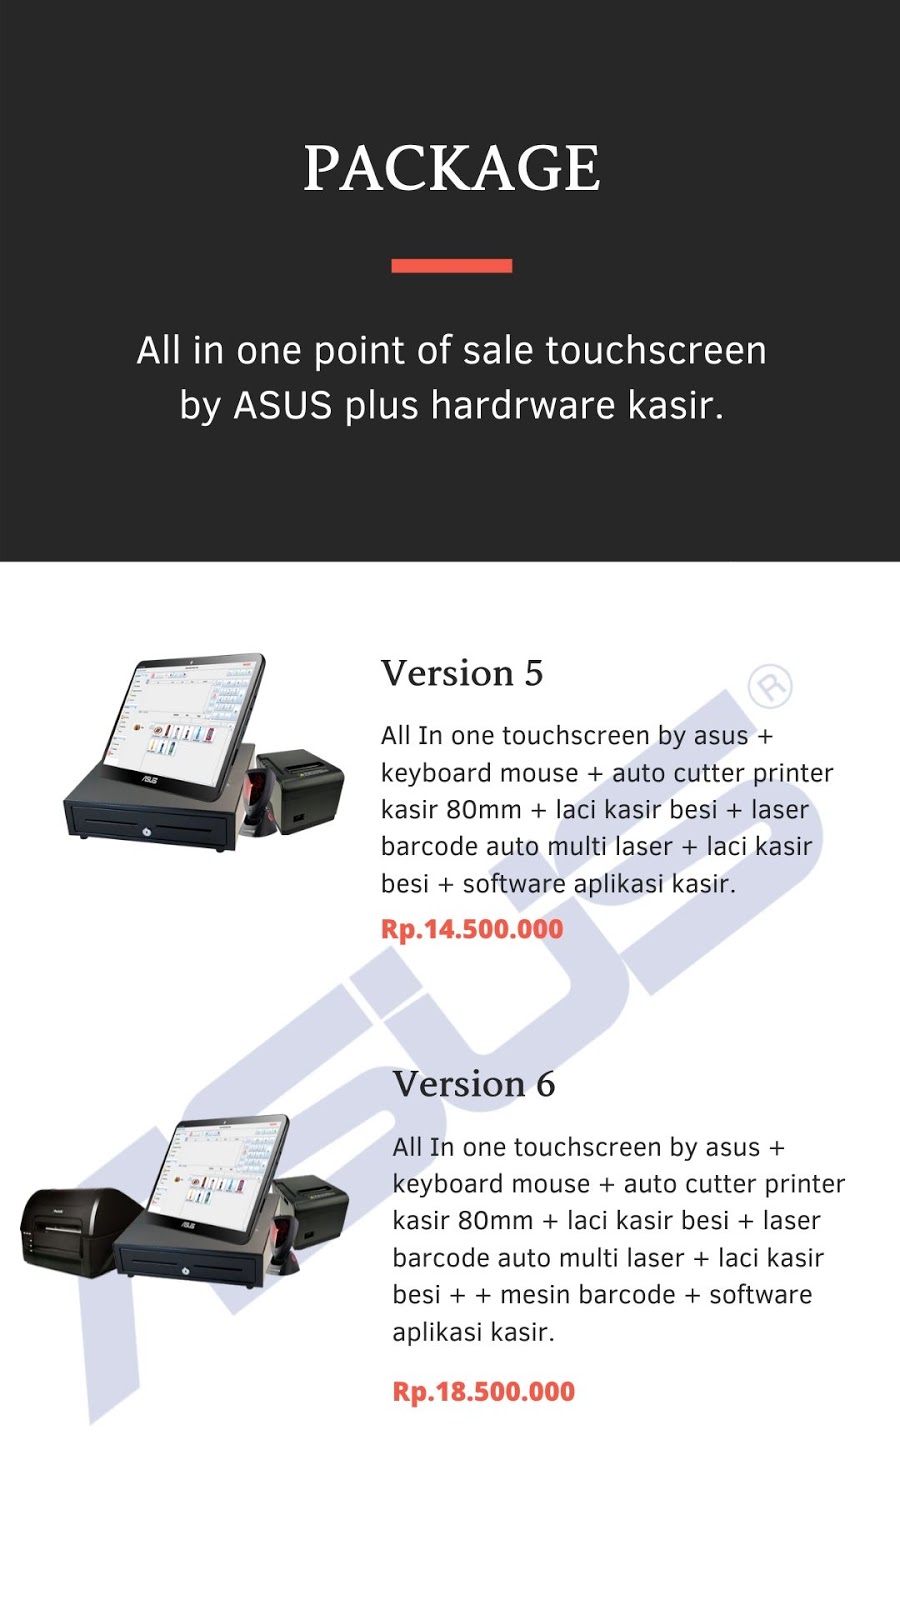 ALL IN ONE TOUCHSCREEN POINT OF SALE ASUS - harga, all in one, all in one point of sale, all in one pos, all in one touchscreen, ASUS, kasir, list, mesin, MESIN KASIR, mesin kasir online, online, point of sale, pos, touchscreen, touchscreen pos